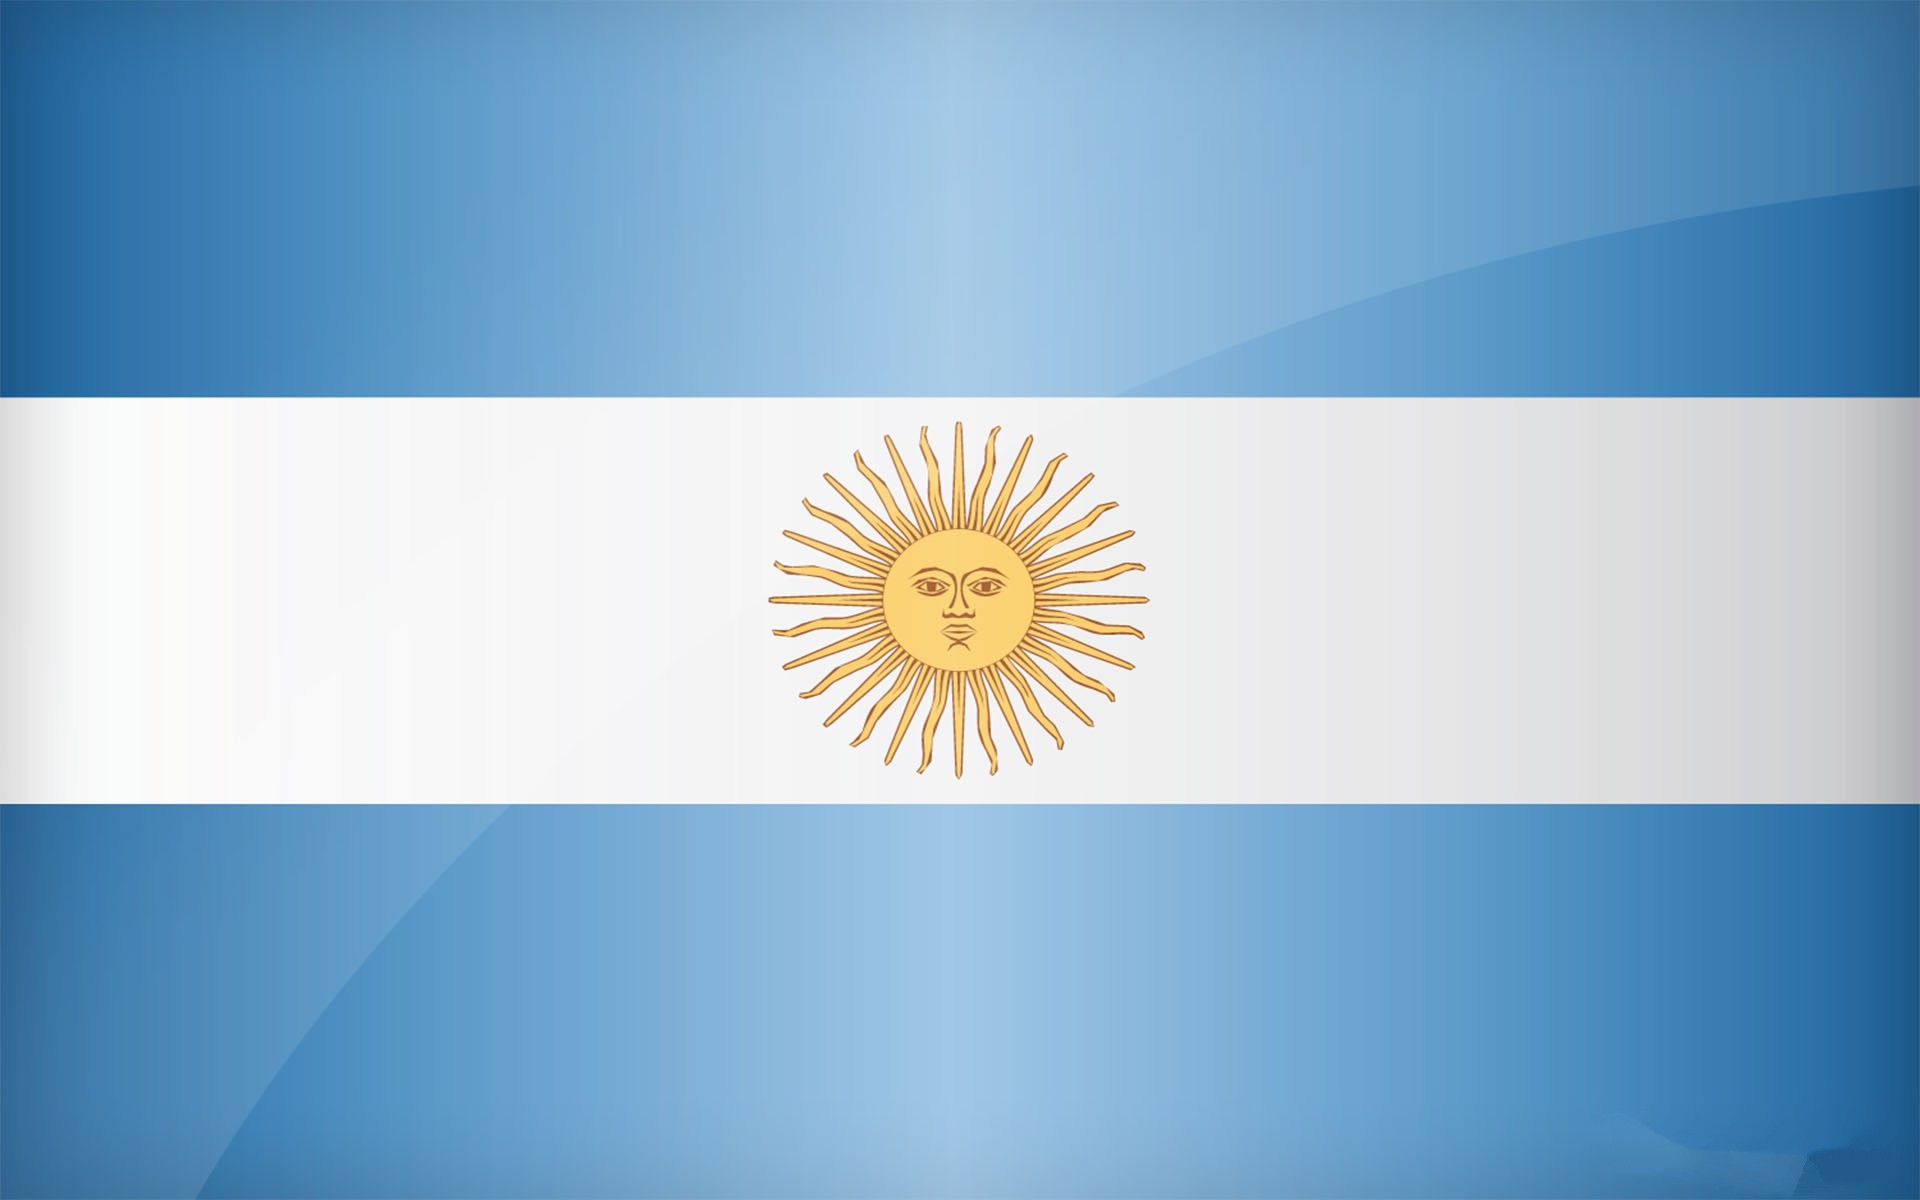 1920x1200 Cool Collections ofArgentina Flag Desktop Wallpaper For Desktop, Laptop and  Mobiles. Here You Can Download More than 5 Million Photography collections  ...